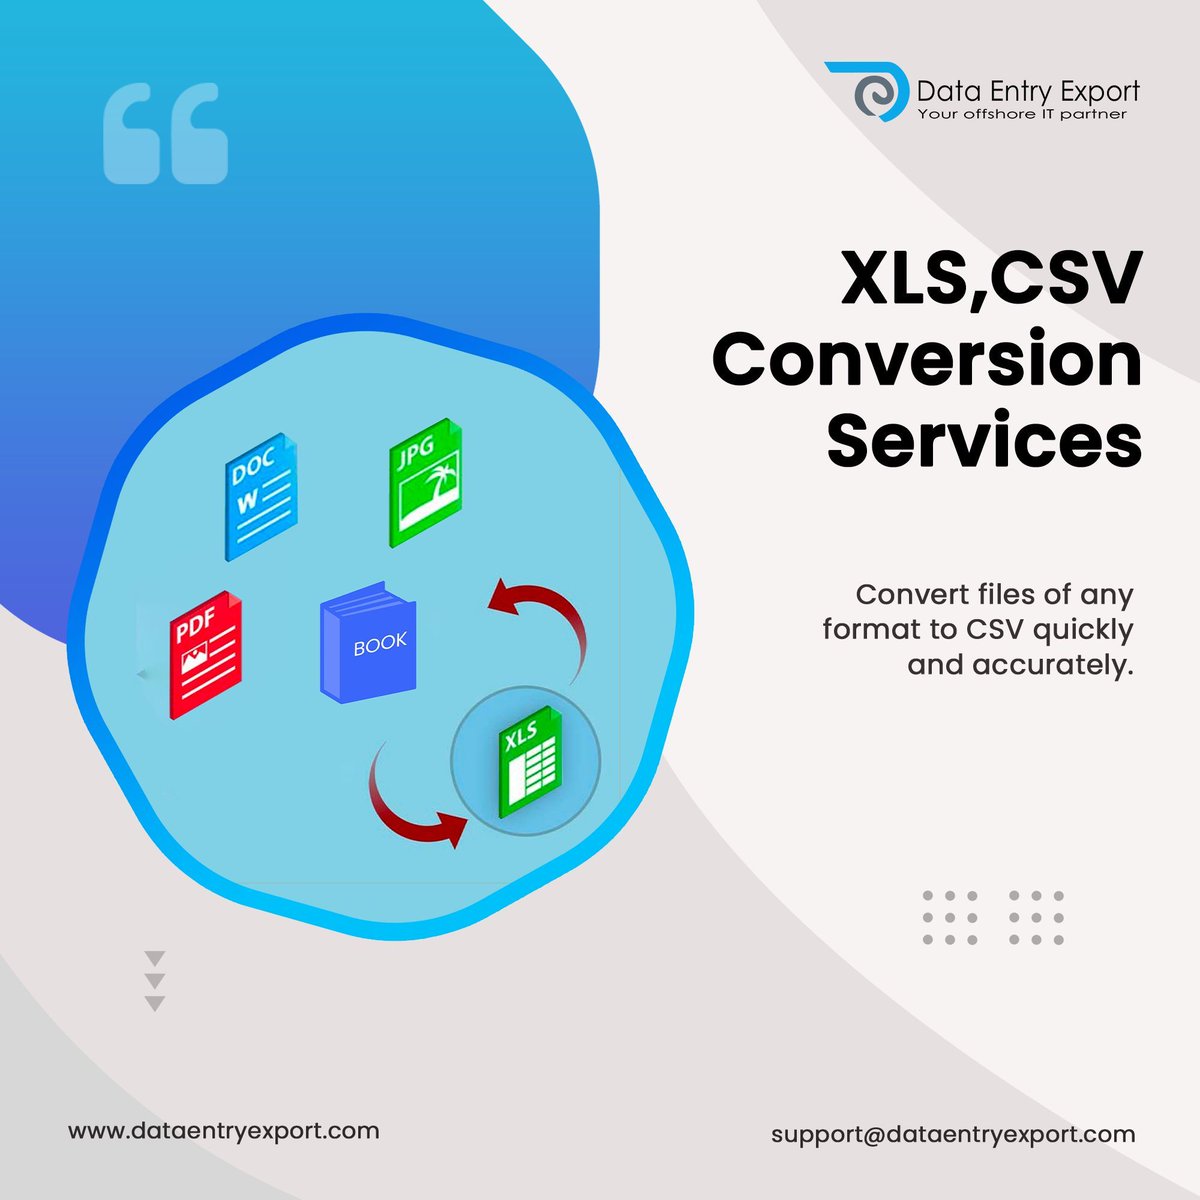 Unlock the Power of Your Data! Convert XLS and CSV Files with Ease. Transform your spreadsheets seamlessly.

Read more: dataentryexport.com/xls-csv-conver…

Email us: support@dataentryexport.com

#xlsconversion #csvconversion #bposolutions #bposervices #business